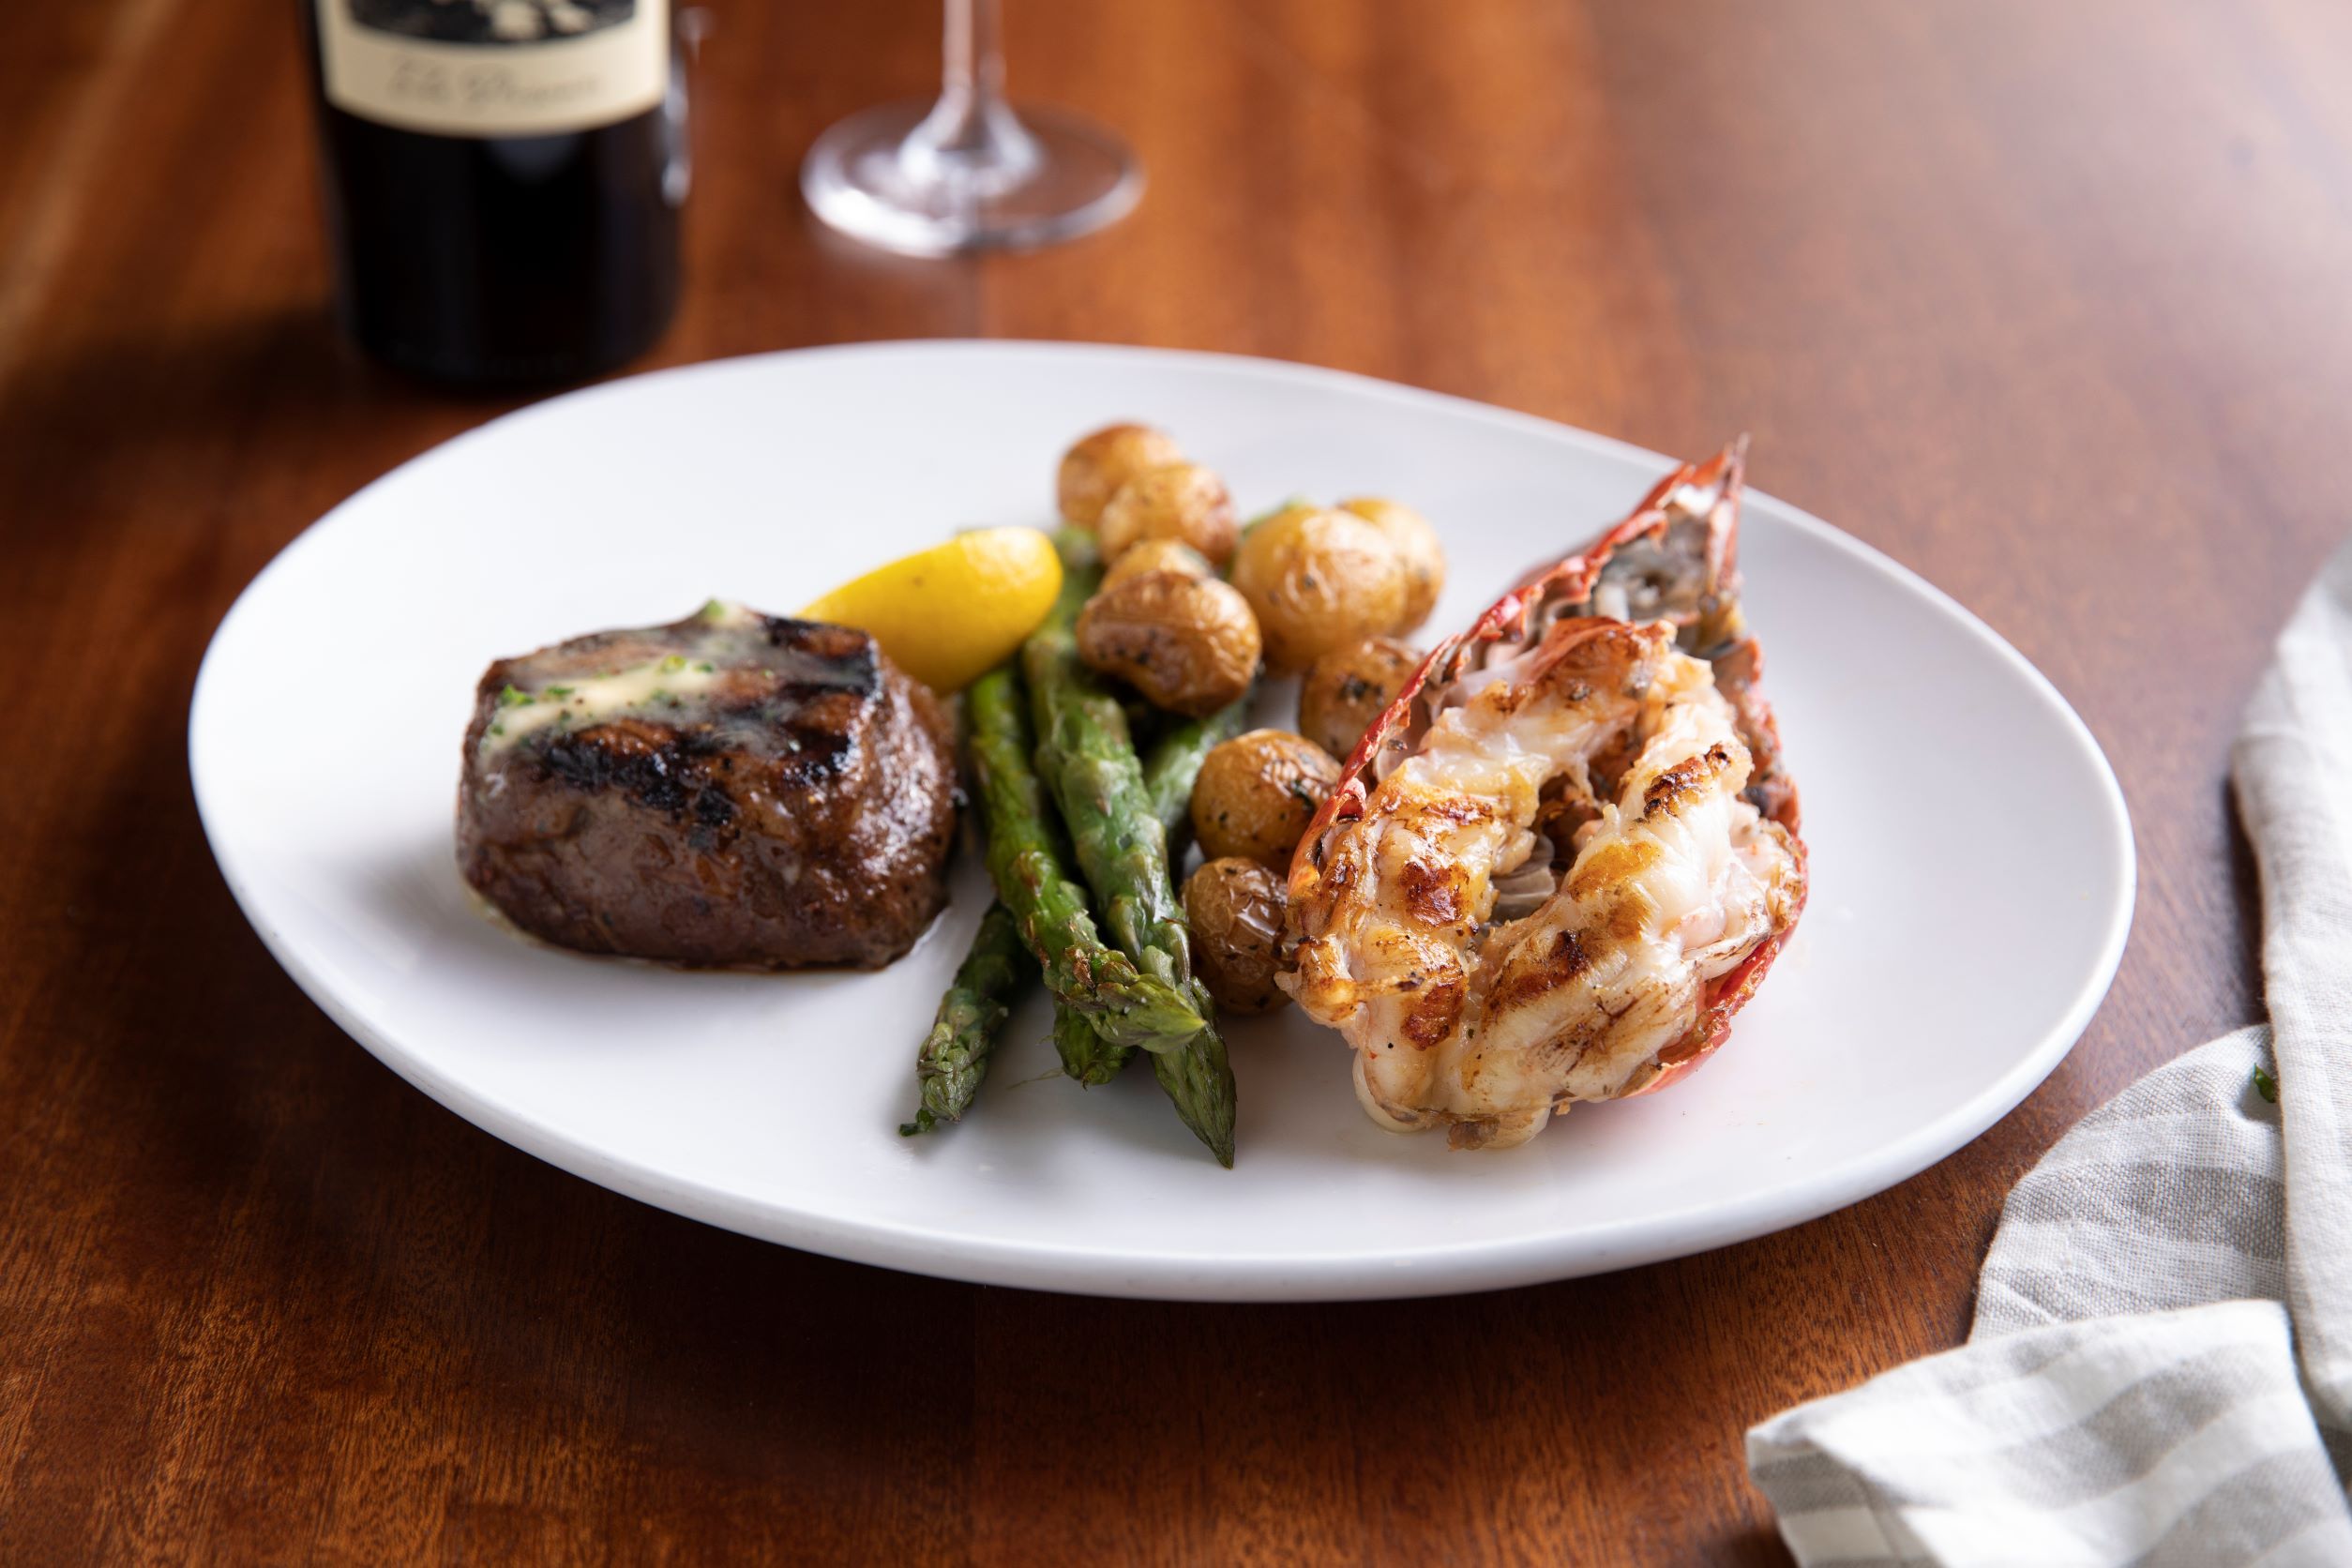 Filet Mignon and Main Lobster Tail - roasted asparagus, marbled potatoes, herb butter